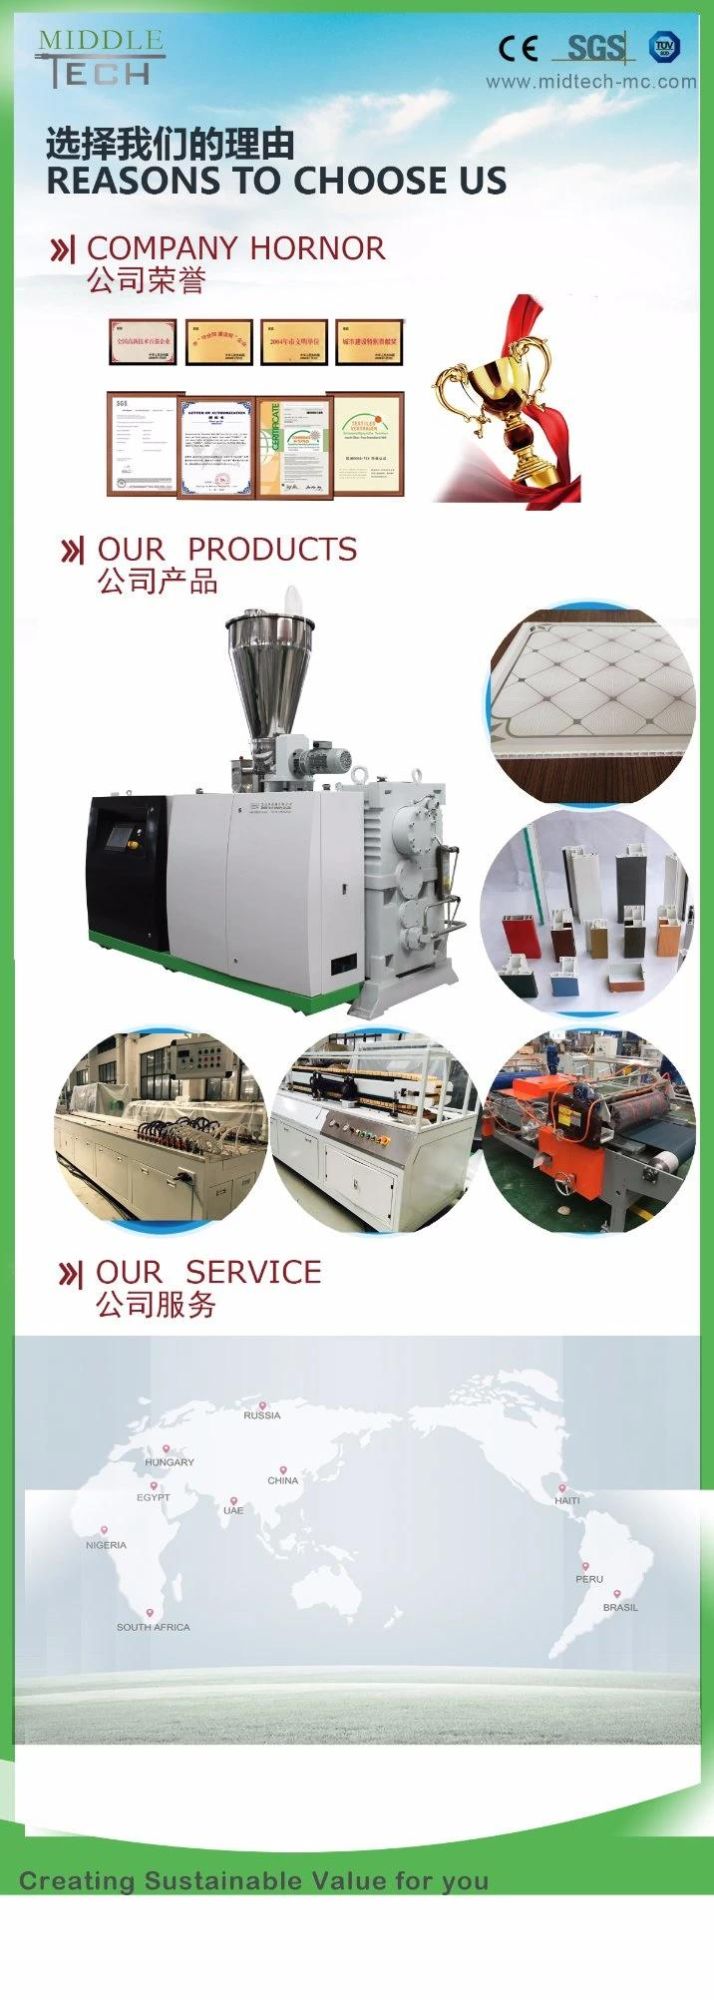 Polycarbonate (PC) LED Light/Lamp Shade Profile Extrusion Machinery